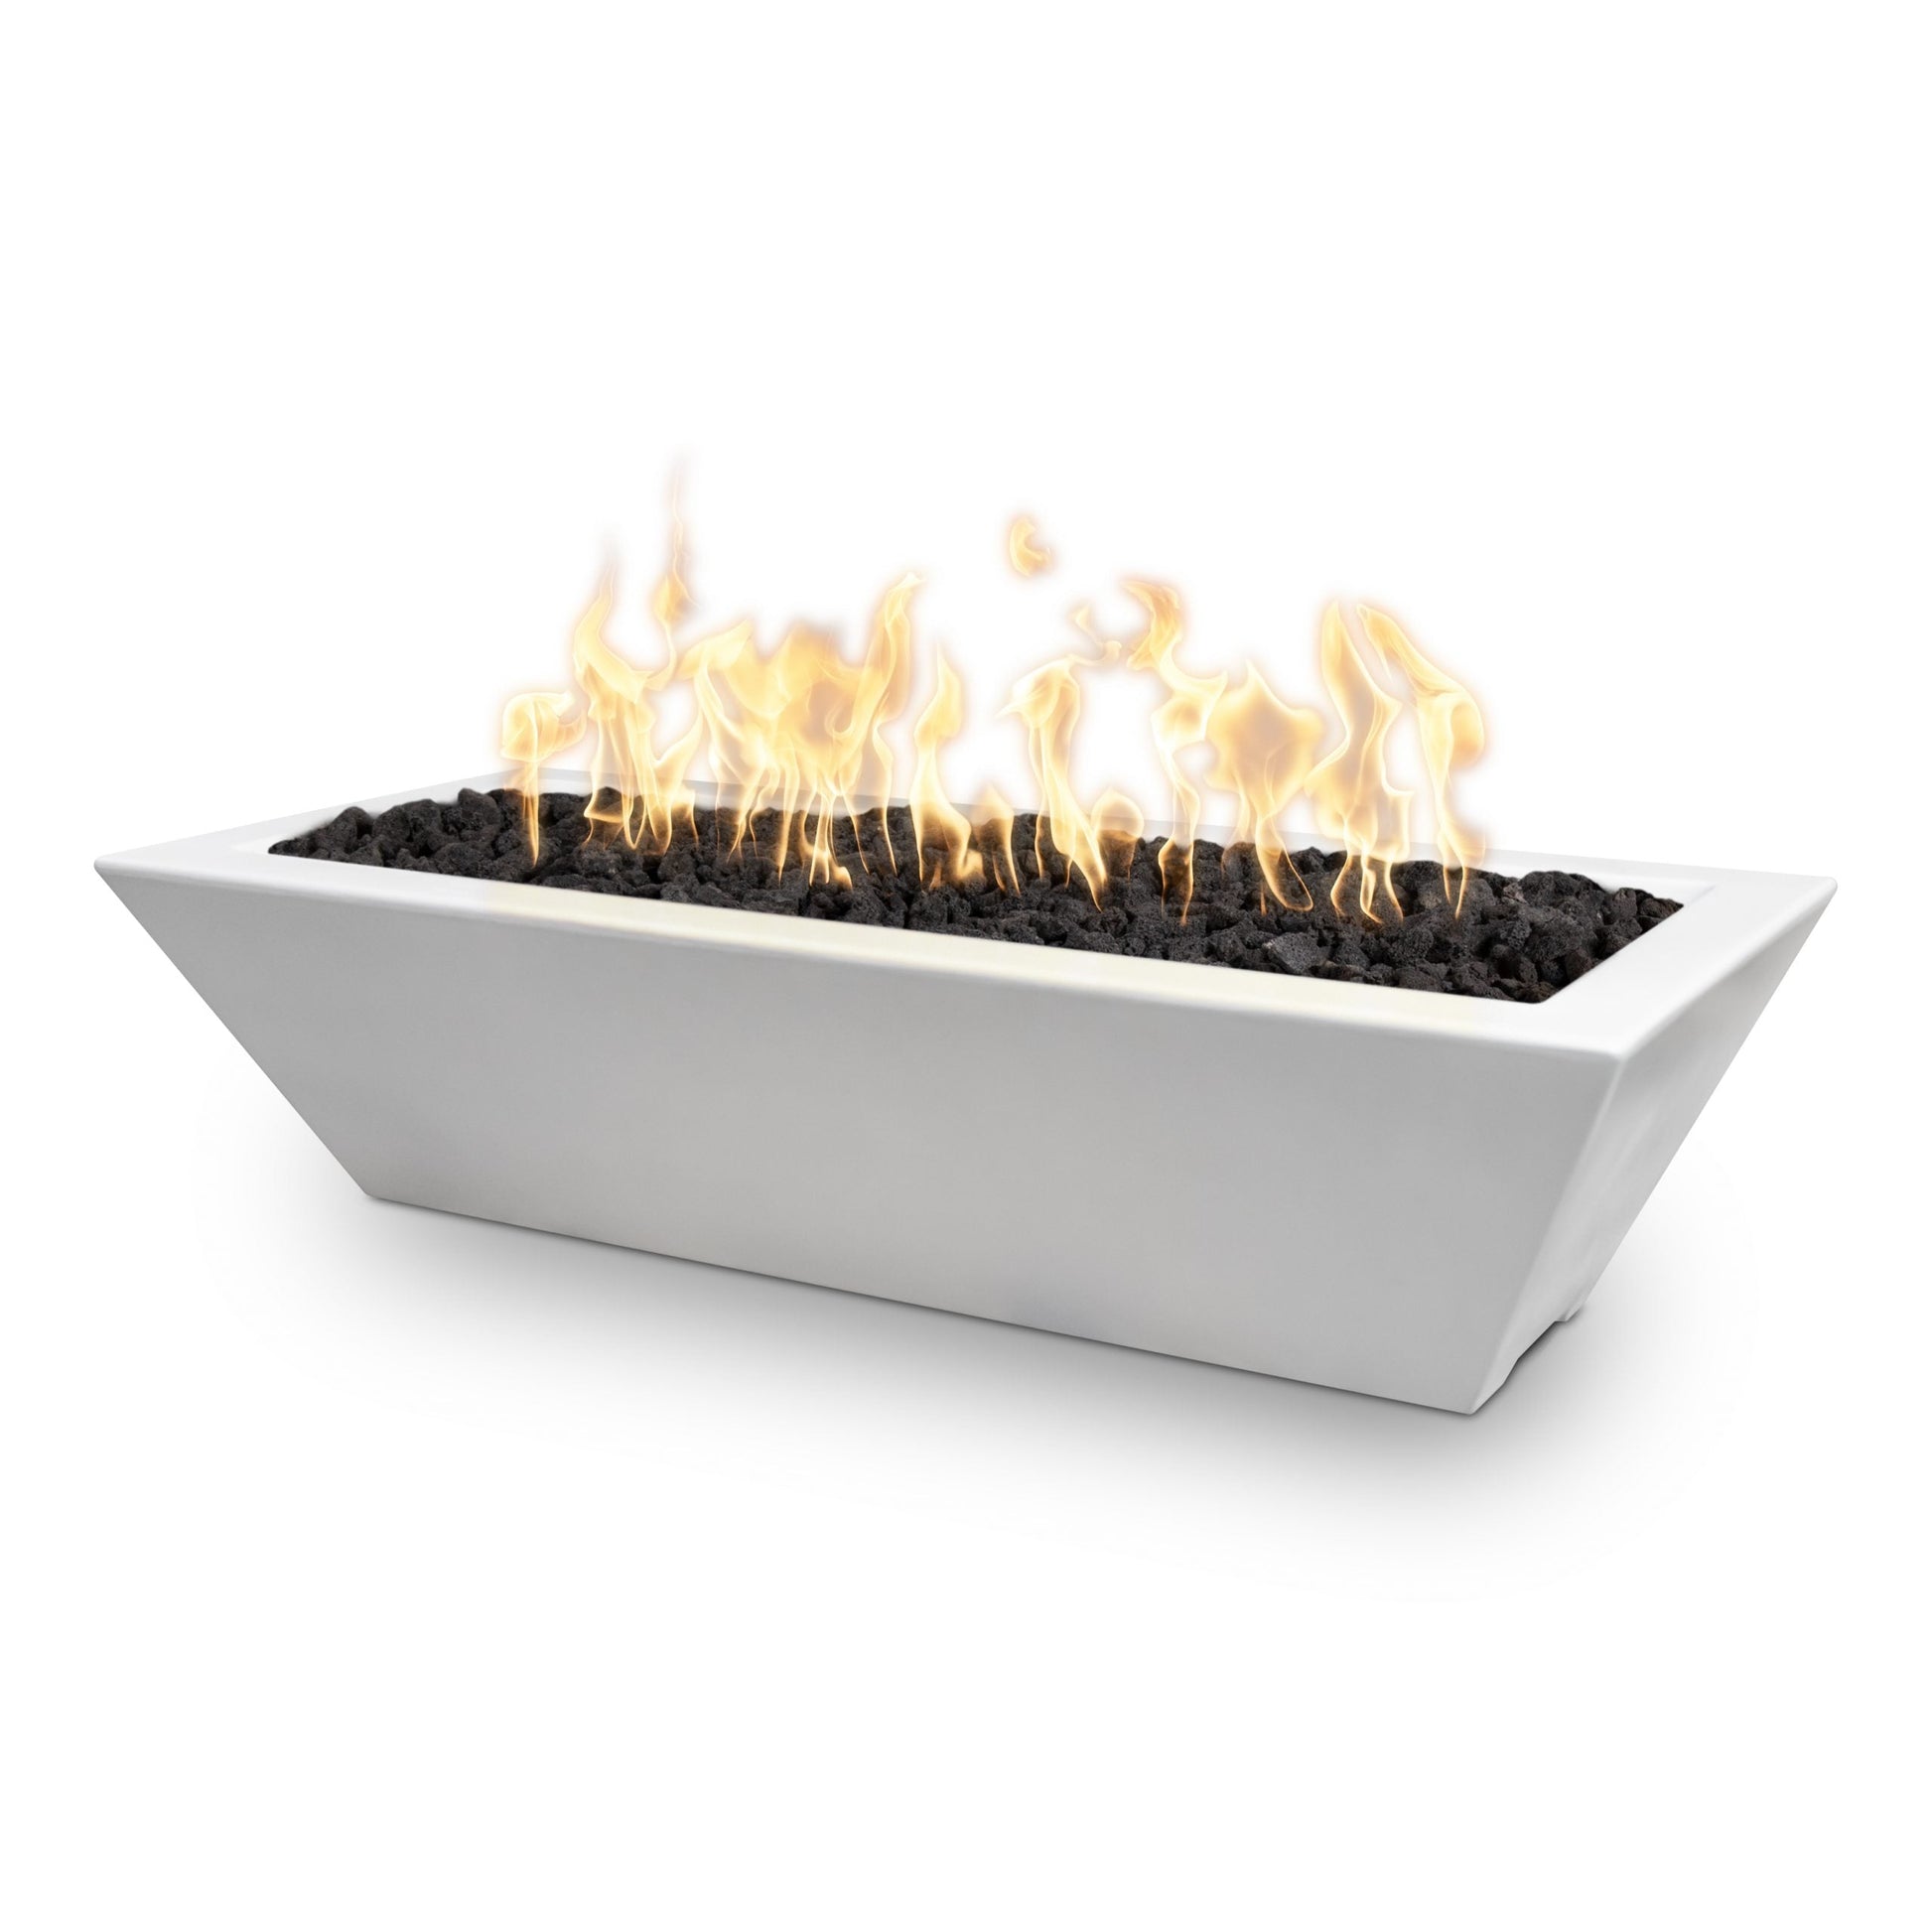 The Outdoor Plus Linear Maya 72" Natural Gray GFRC Concrete Liquid Propane Fire Bowl with Match Lit with Flame Sense Ignition